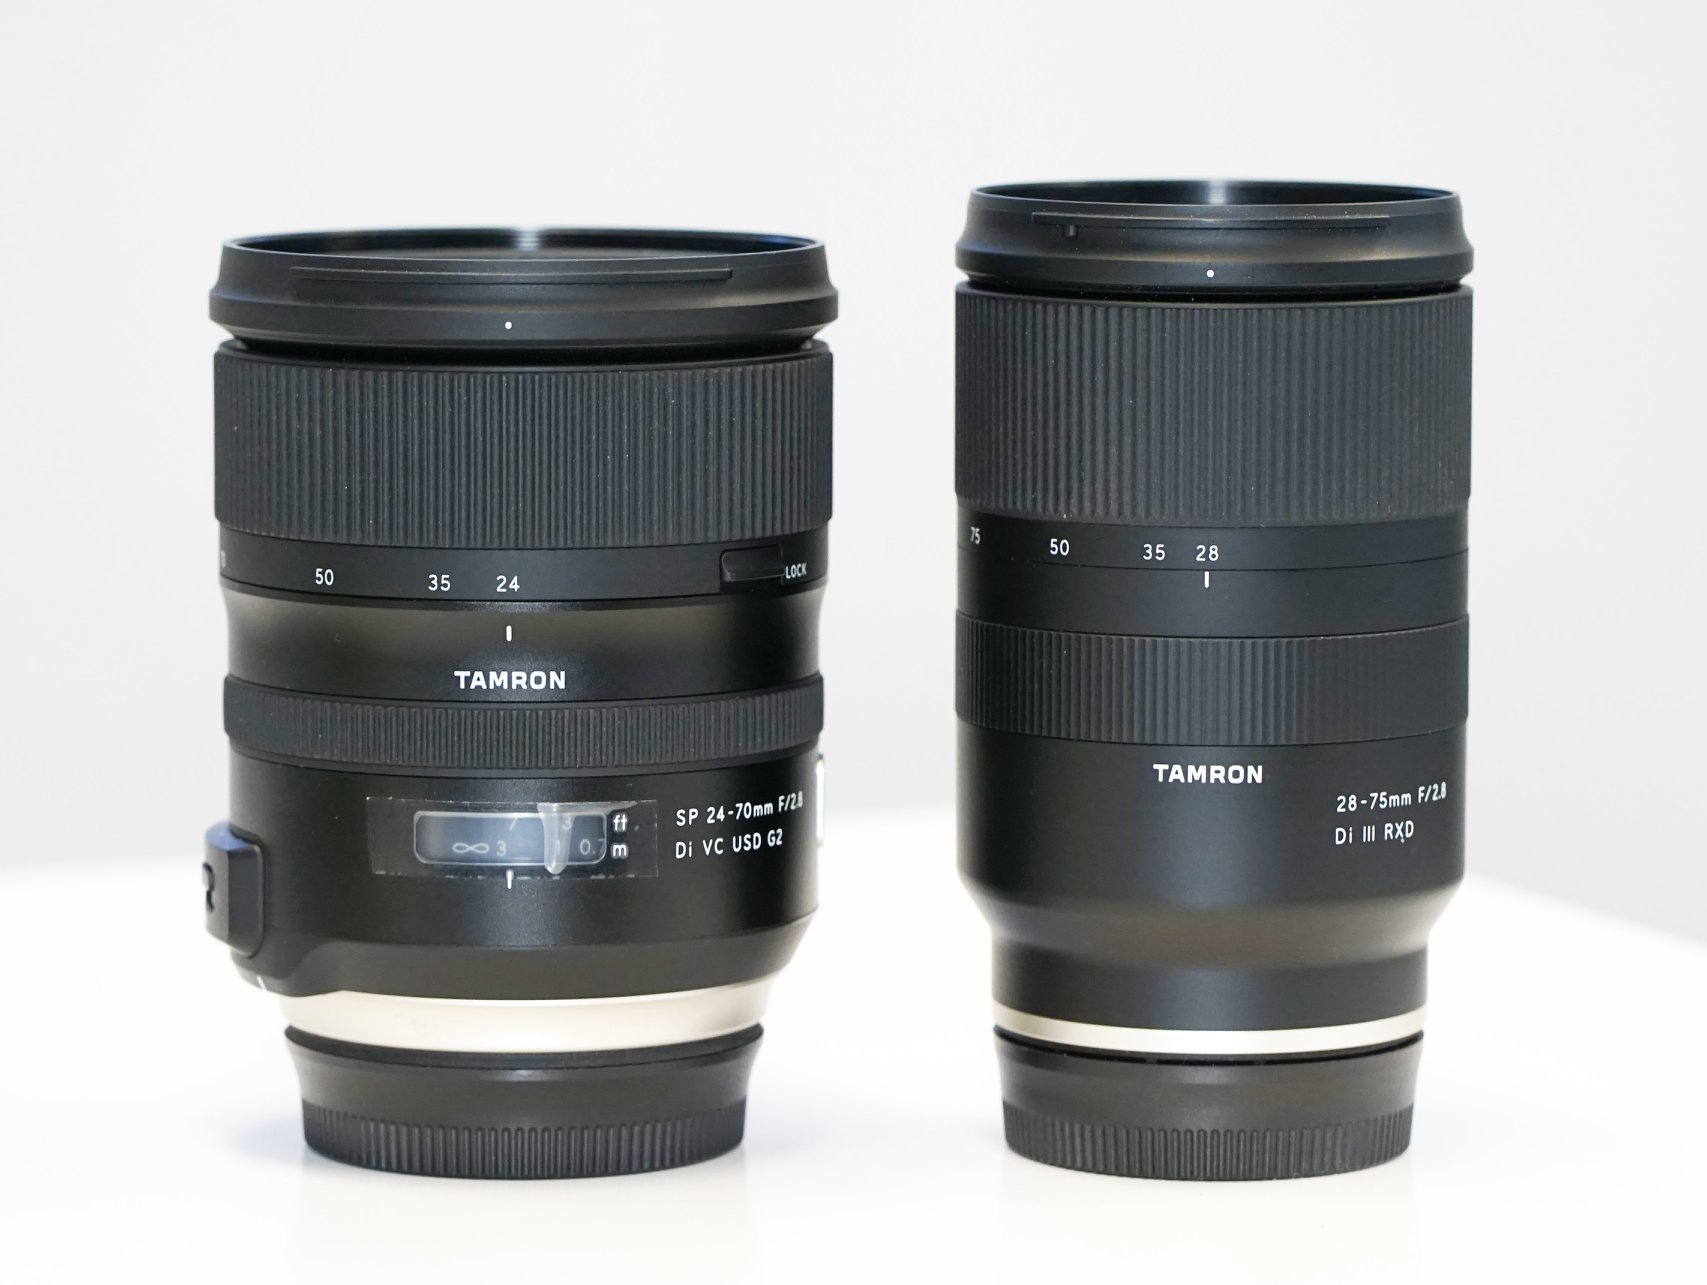 Tamron is Building New Tamron 28-75mm Di III RXD FE To Compete With